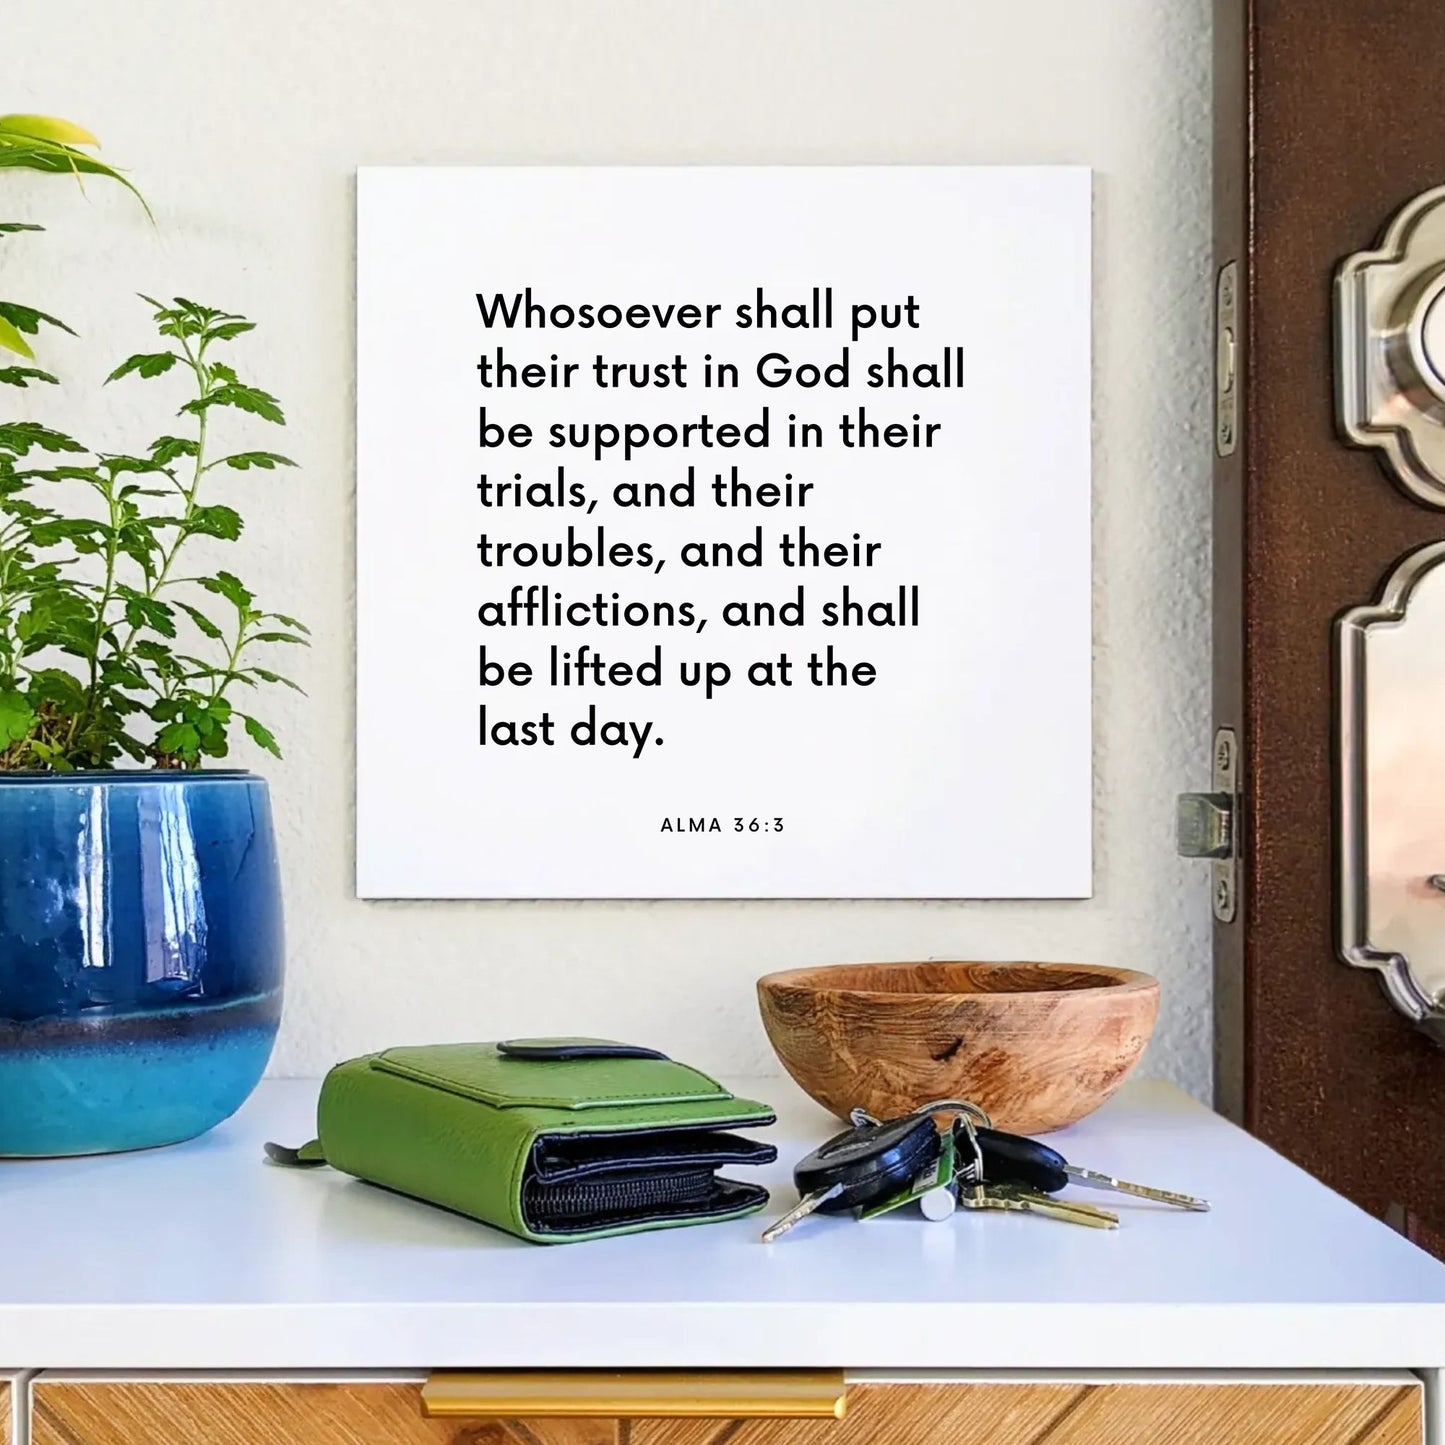 Entryway mouting of the scripture tile for Alma 36:3 - "Whosoever shall put their trust in God"